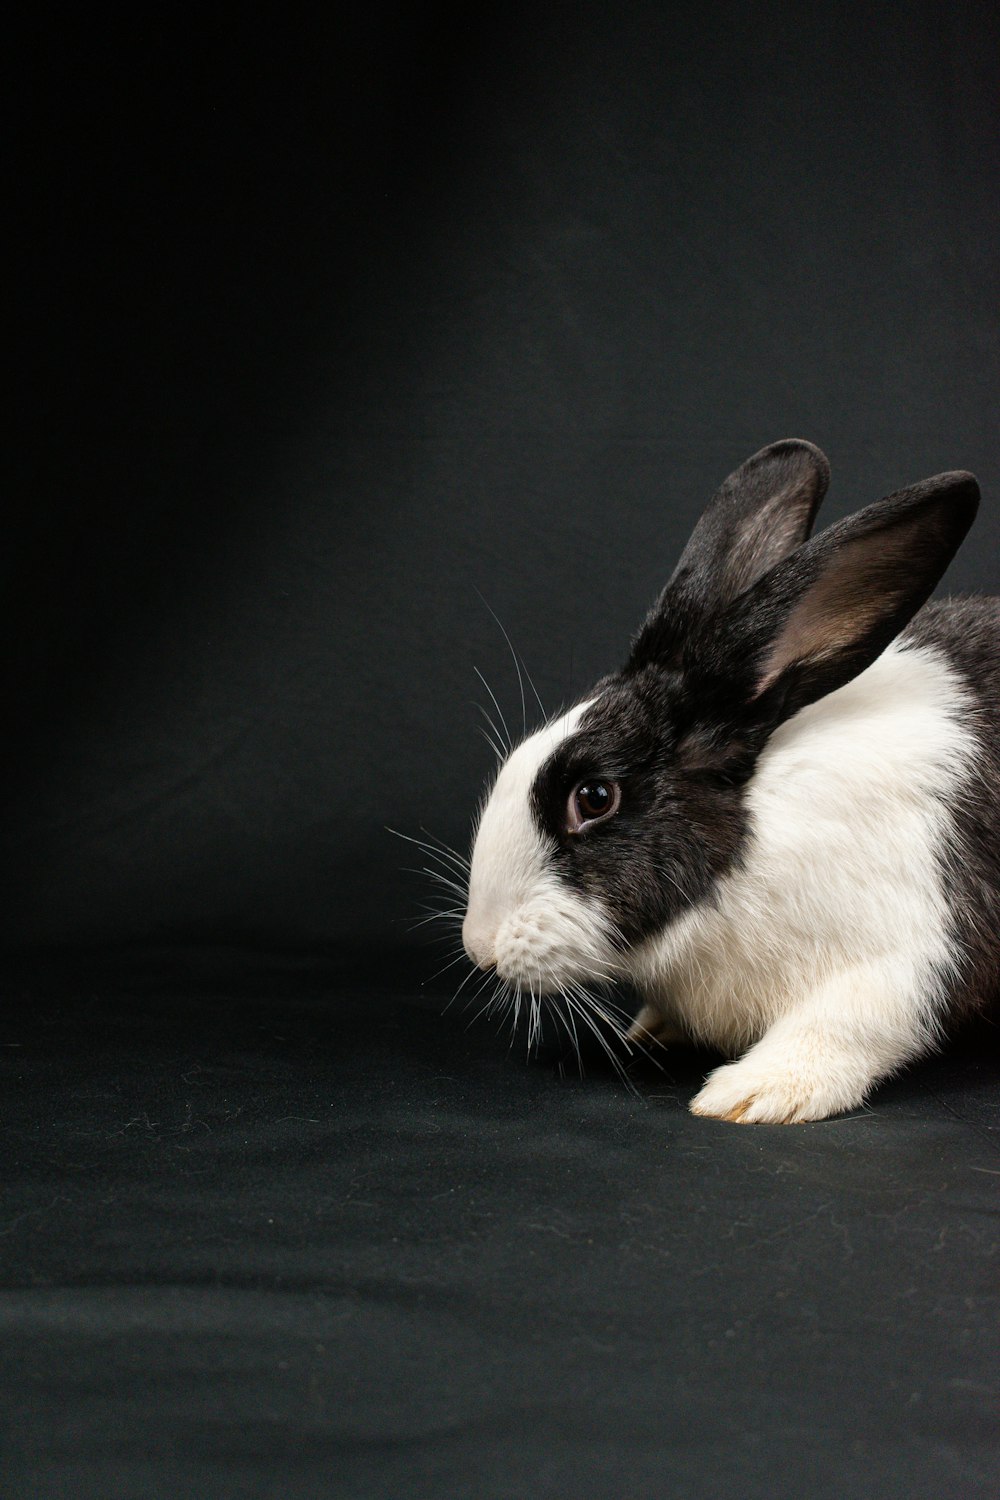 a black and white rabbit sitting on a black background